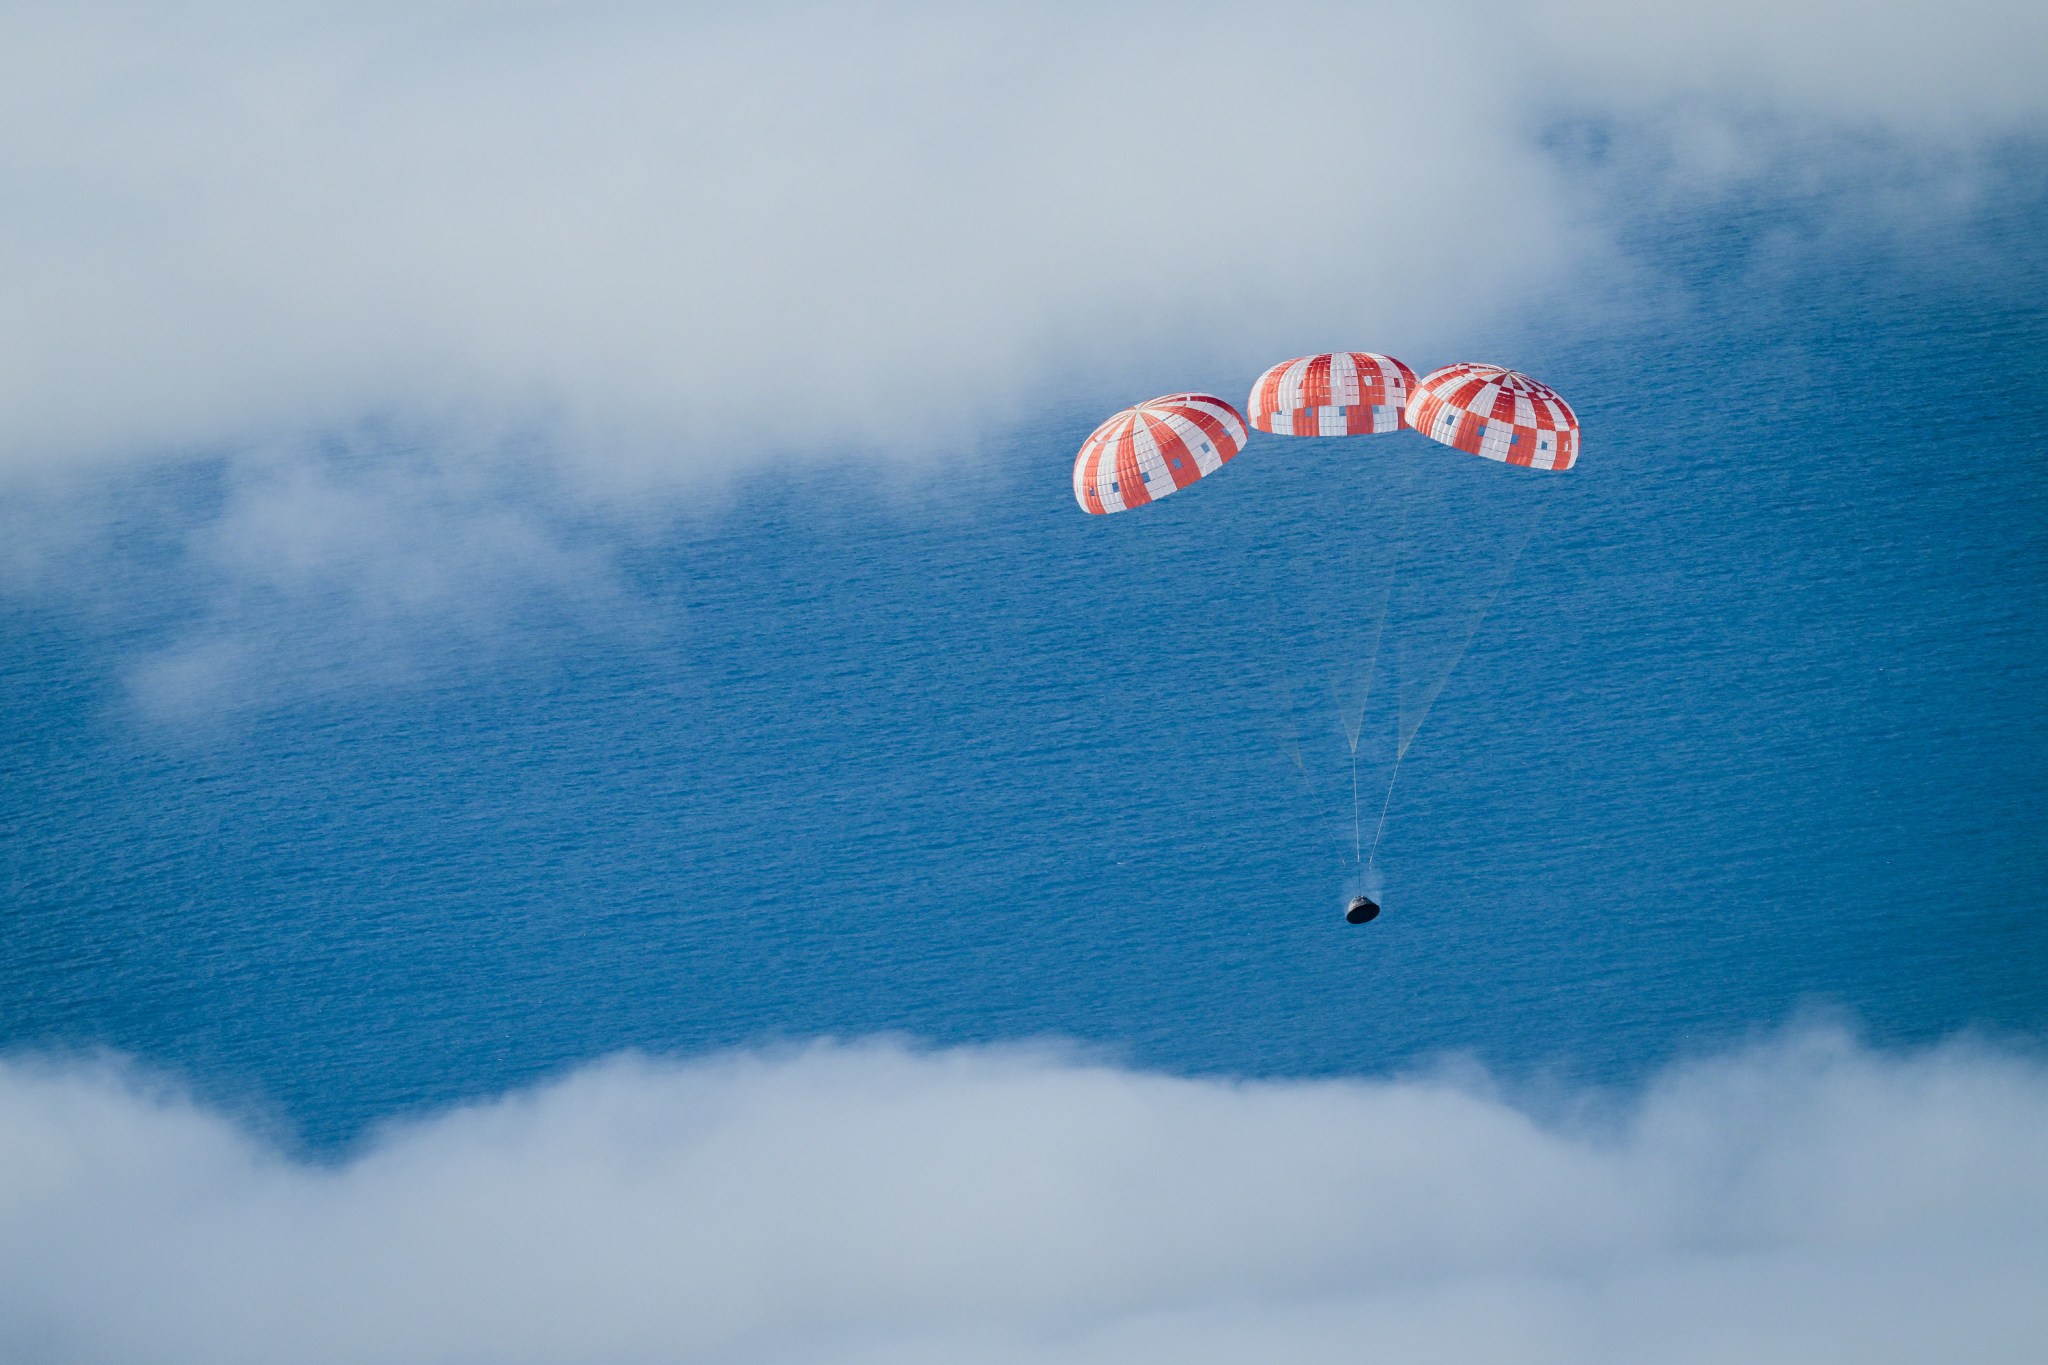 The Orion crew capsule with its three red and white parachutes is seen during the Artemis I mission descending through the clouds to the ocean surface, visible below.